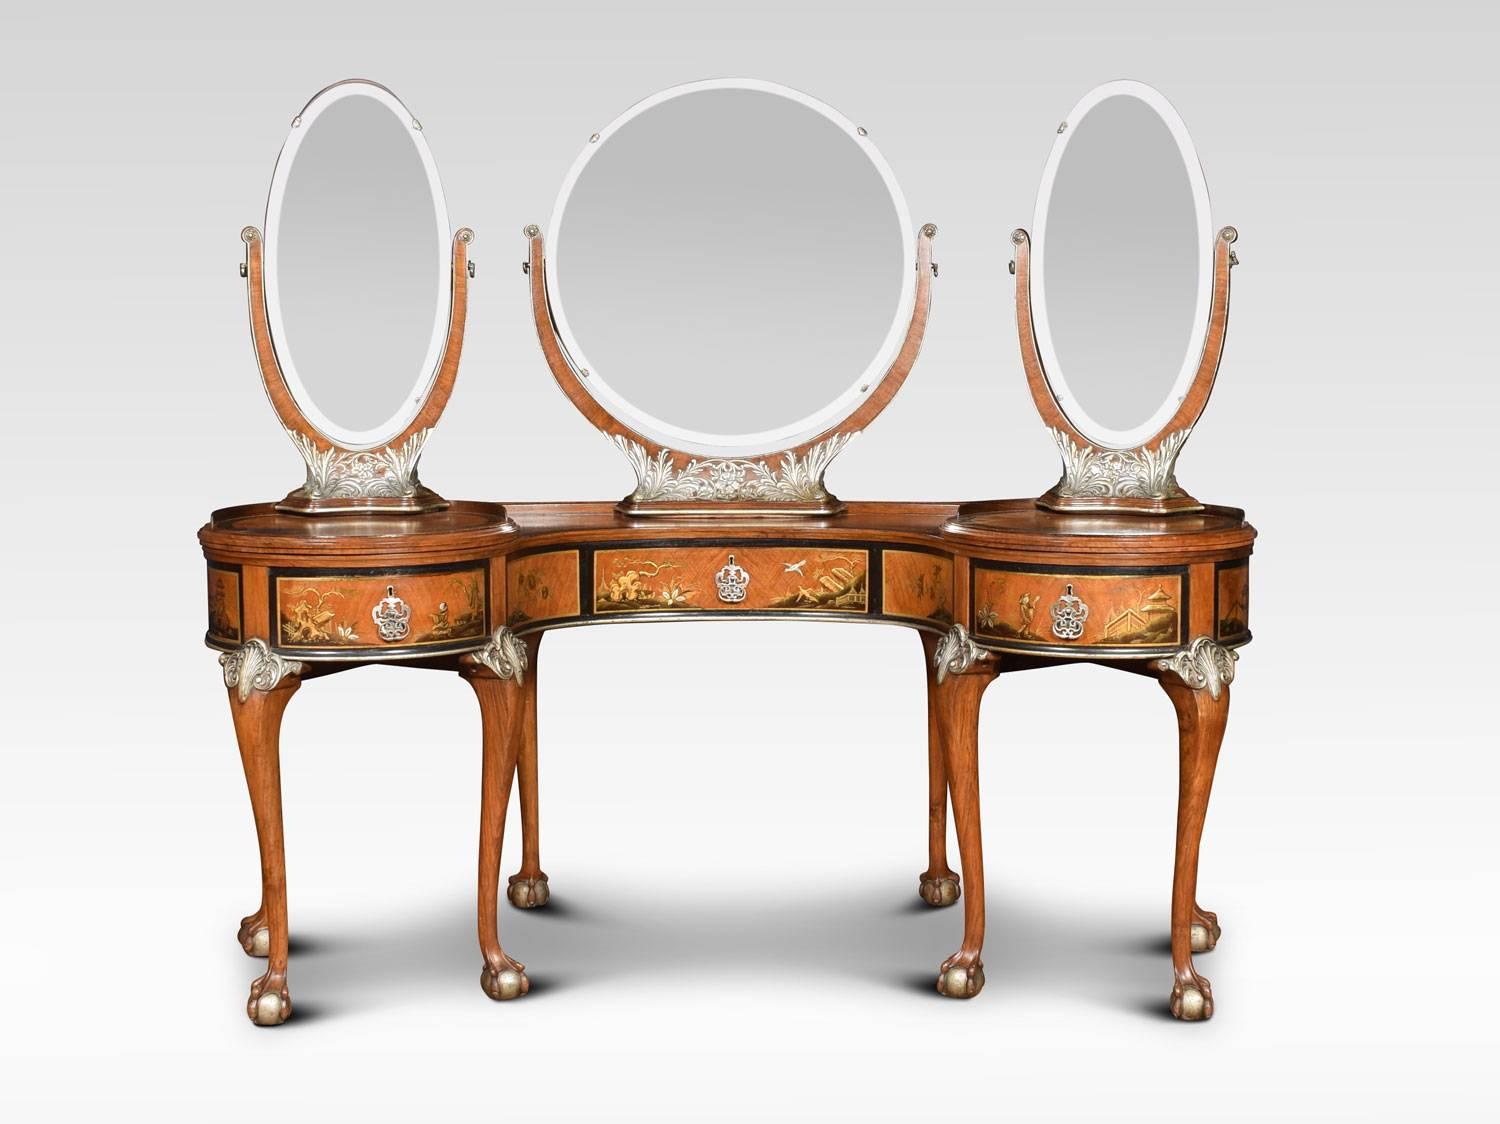 Walnut kidney shaped chinoiserie decorated dressing table. The large central circular beveled mirror raised up on ornate superstructure with silvered foliated base. Flanked by unusual side mirrors which have swivel action and can rotate fully. The